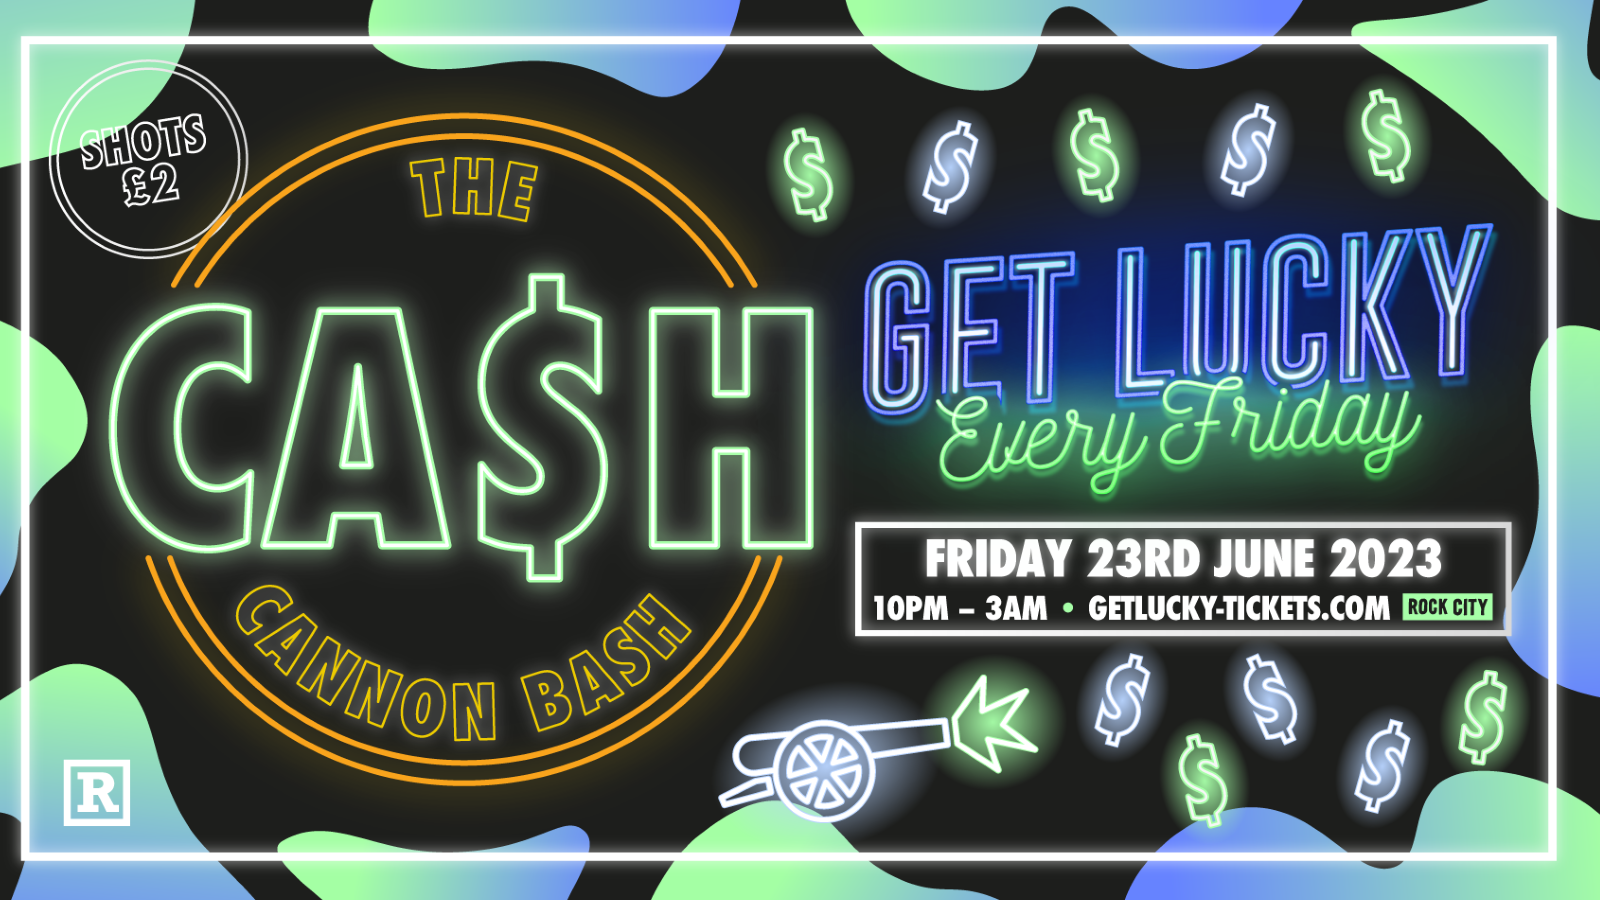 Get Lucky – The Cash Cannon Bash – Nottingham’s Biggest Friday Night – 23/06/23